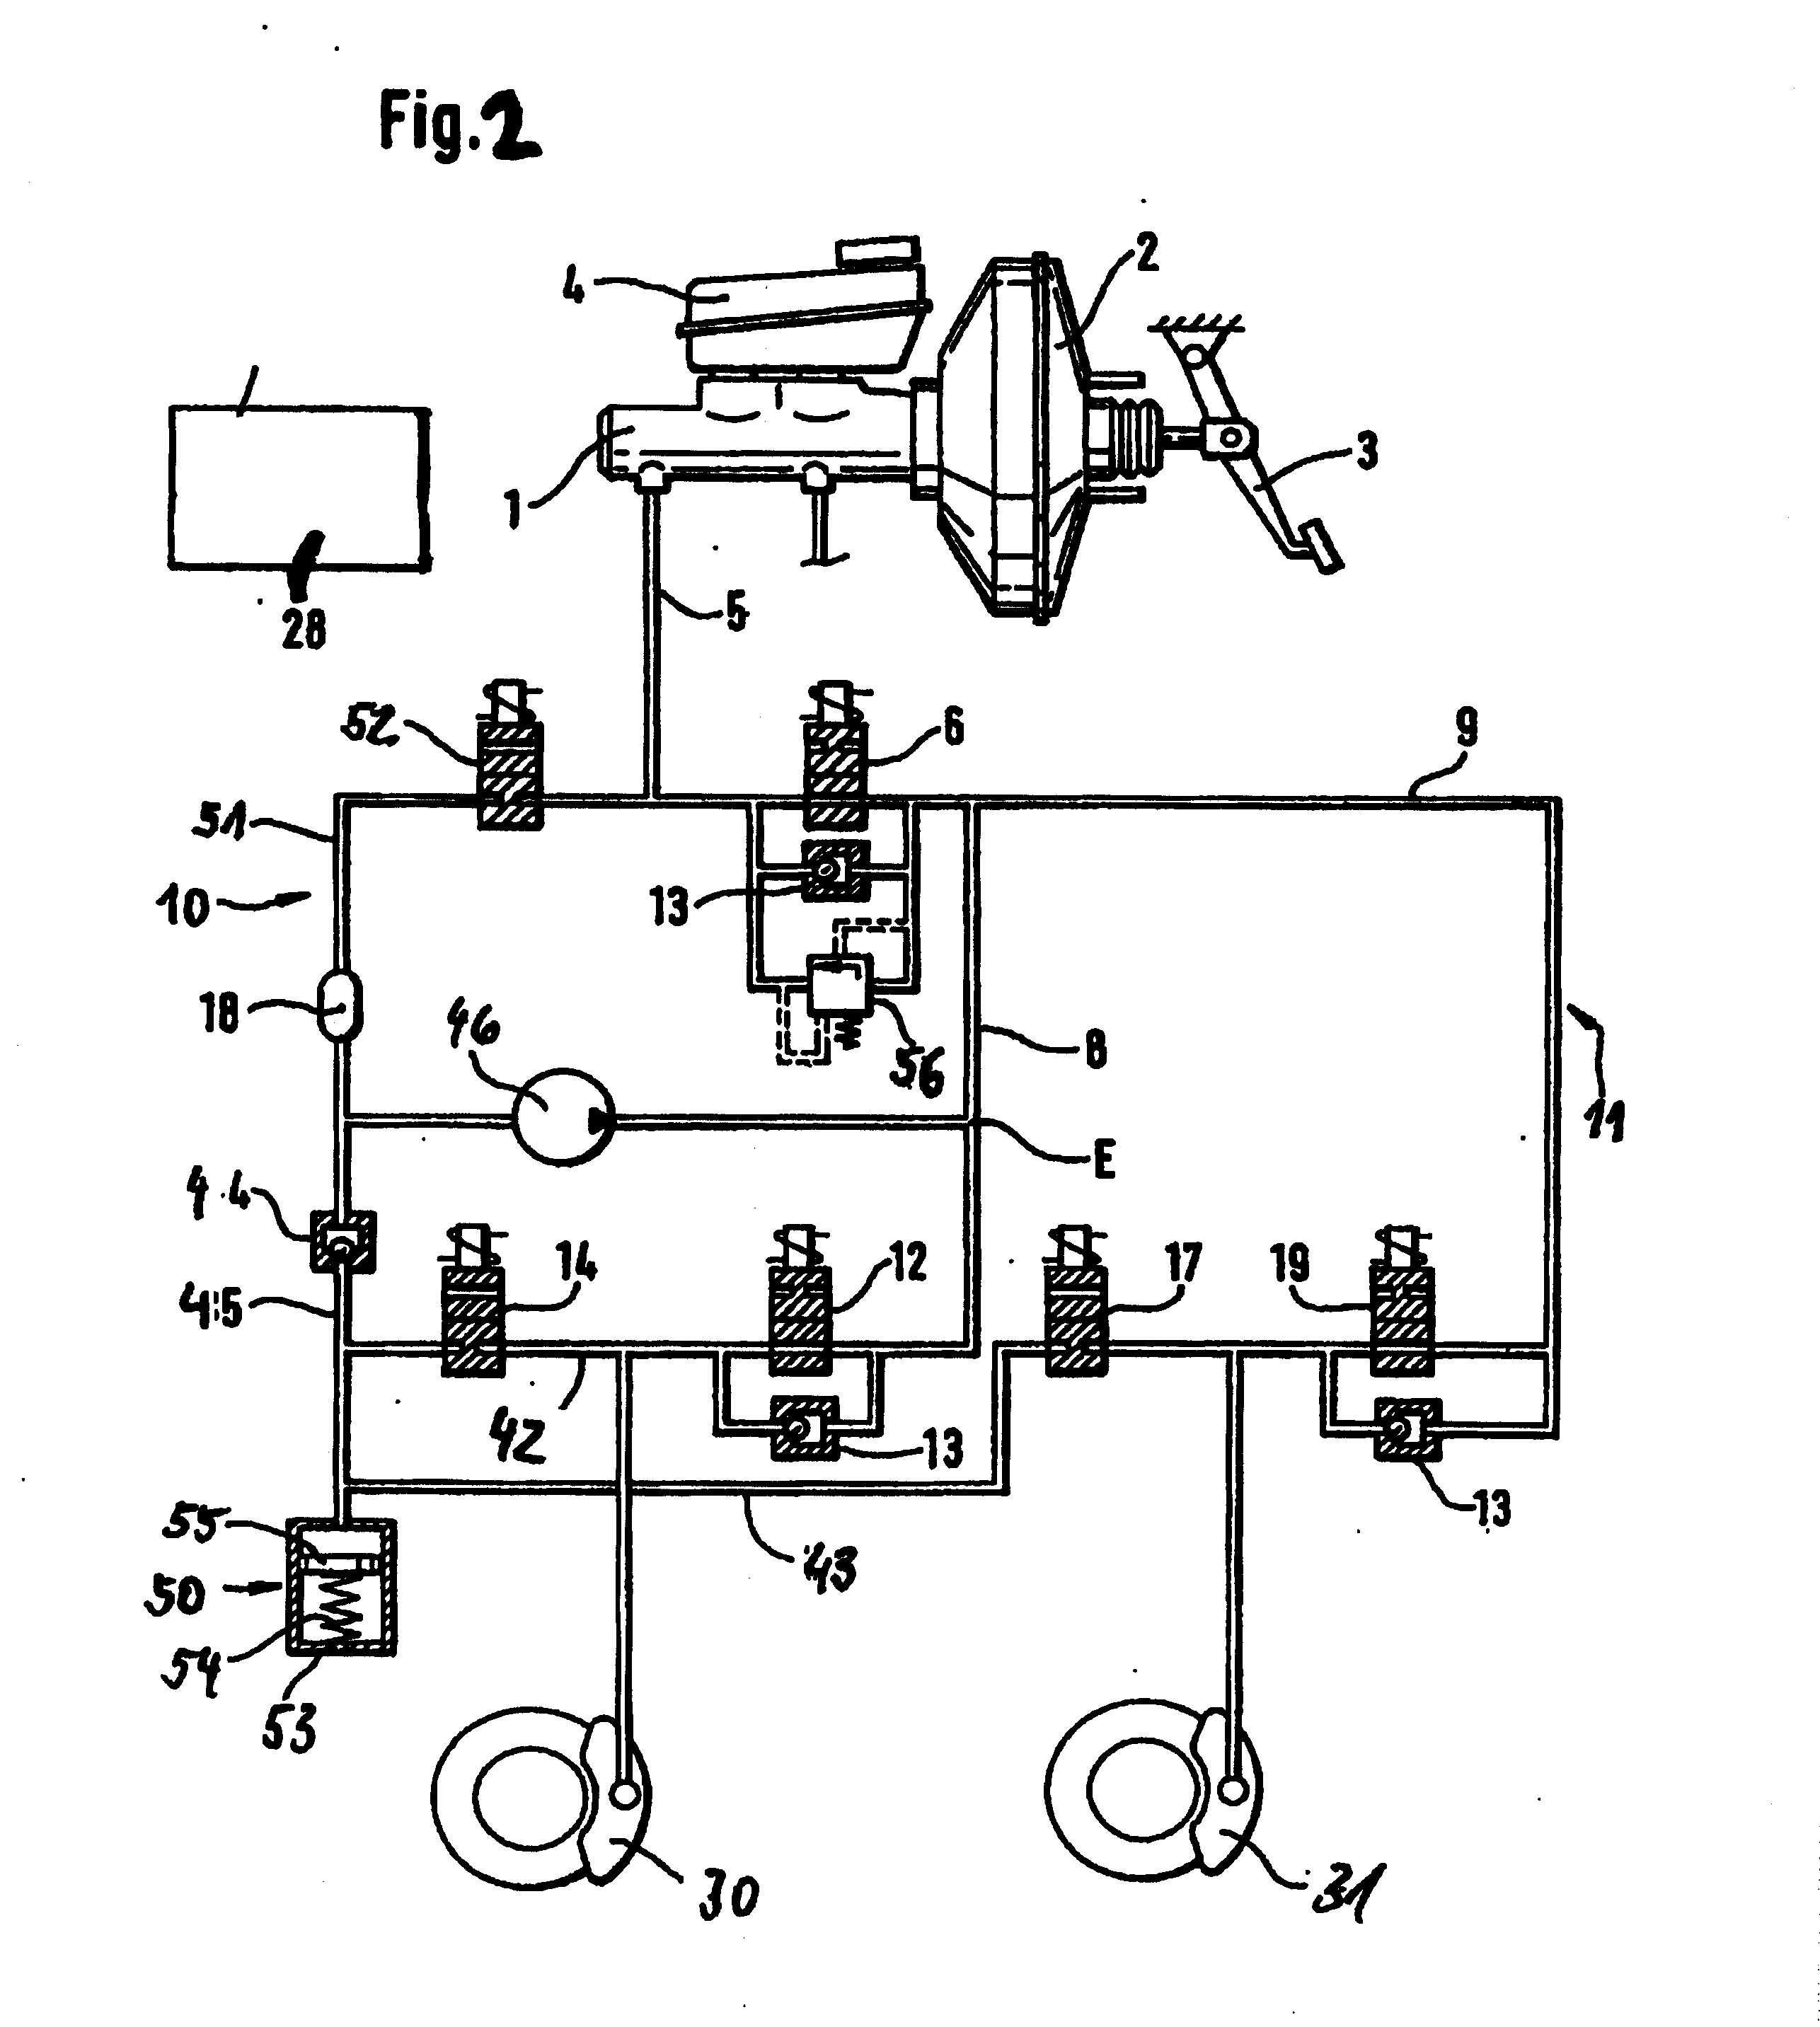 Method and system for stabilizing a car-trailer combination